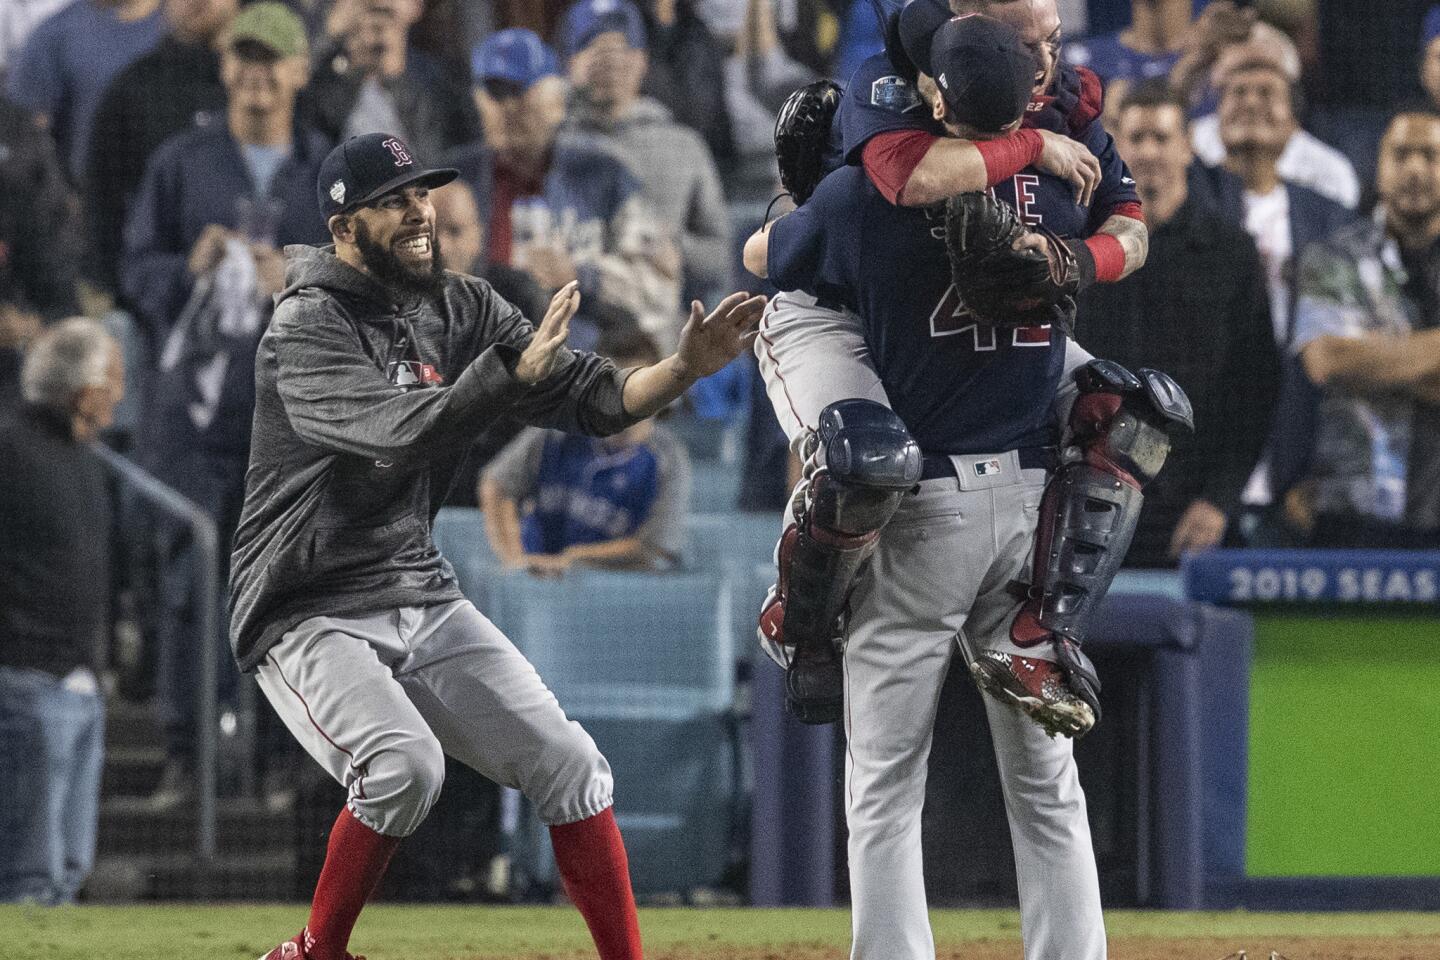 Red Sox starting pitcher David Price joins starter-turned-reliever Chris Sale and catcher Christian Vazquez in celebrating a 5-1 win over the Dodgers to clinch the World Series title.